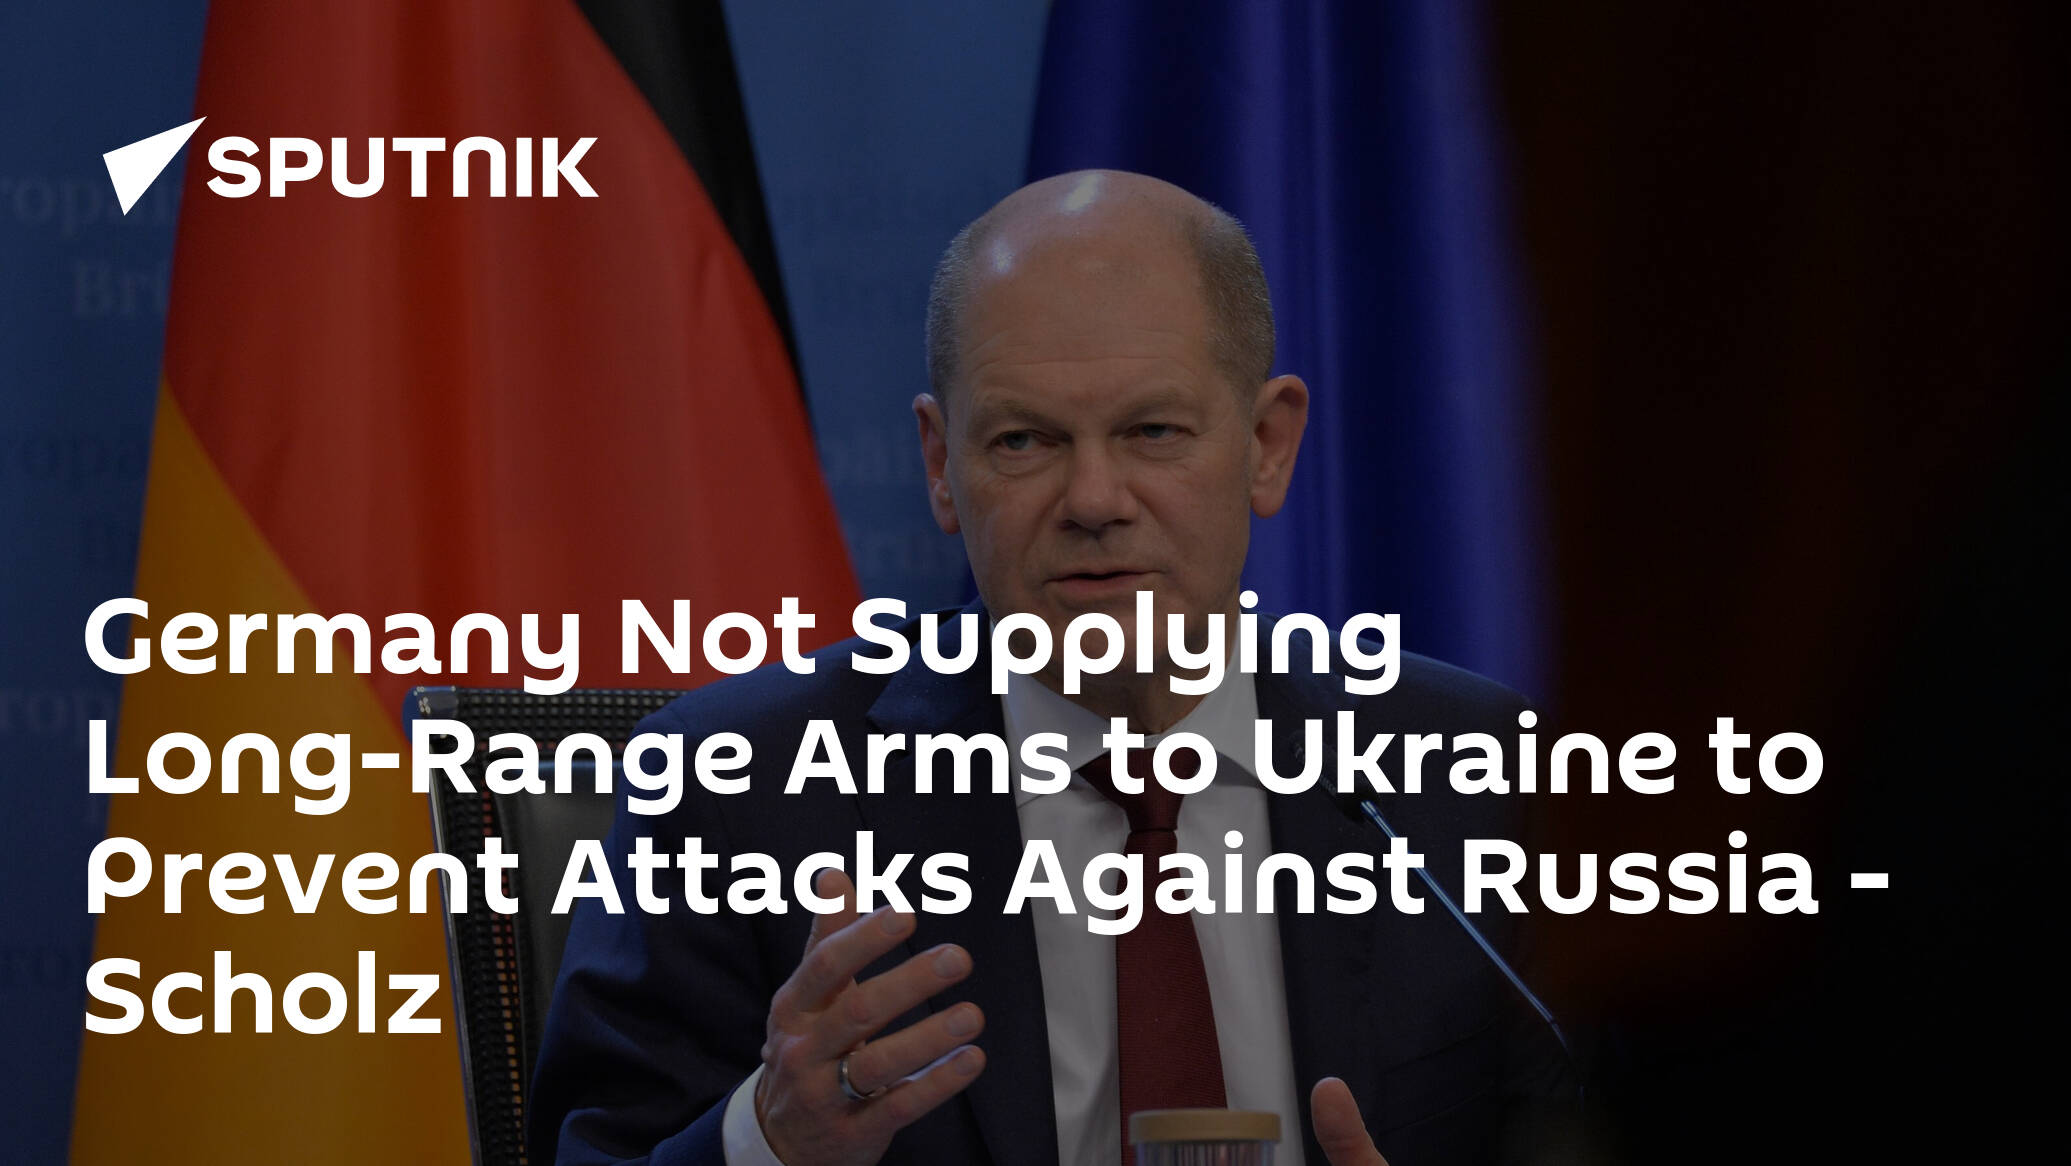 Germany Not Supplying Long-Range Arms to Ukraine to Prevent Attacks Against Russia – Scholz